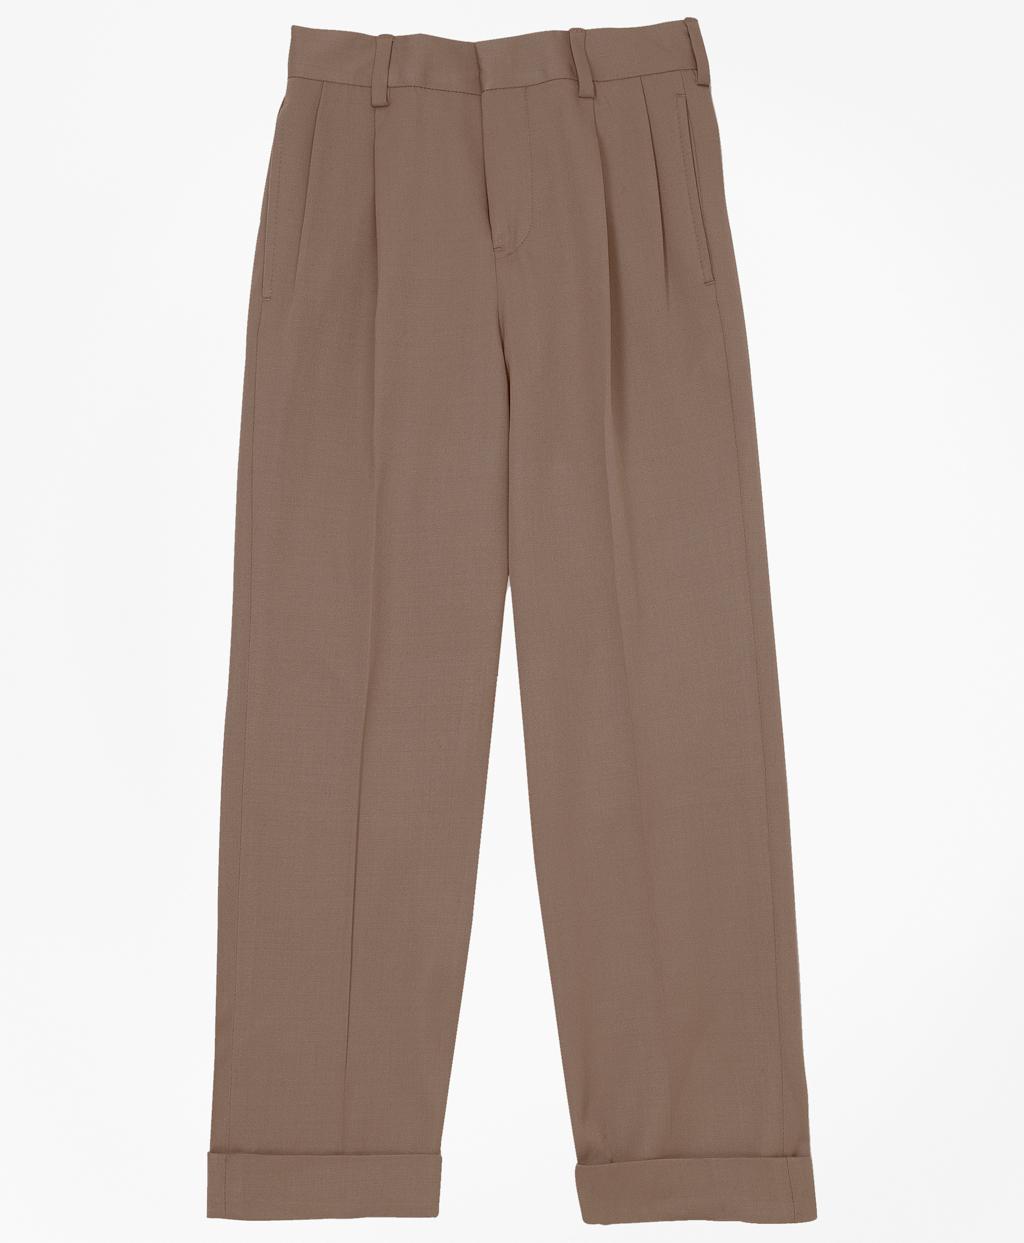 Lyst - Brooks brothers Pleat-front Gabardine Prep Trousers in Brown